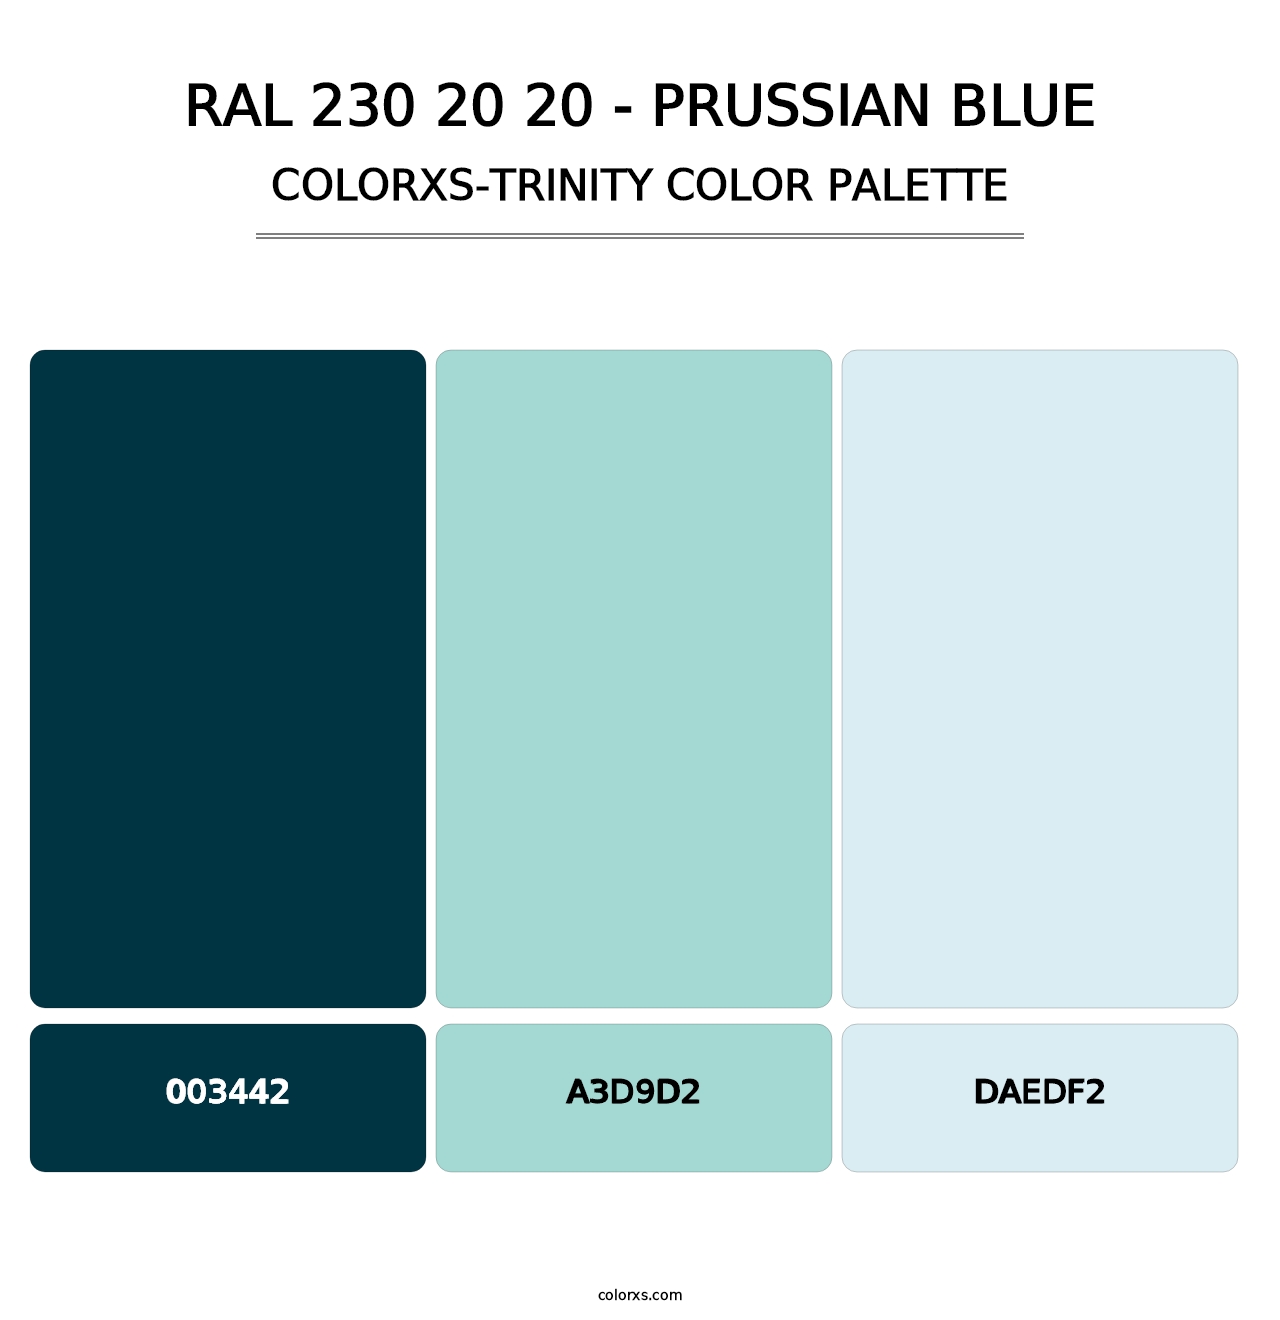 RAL 230 20 20 - Prussian Blue - Colorxs Trinity Palette